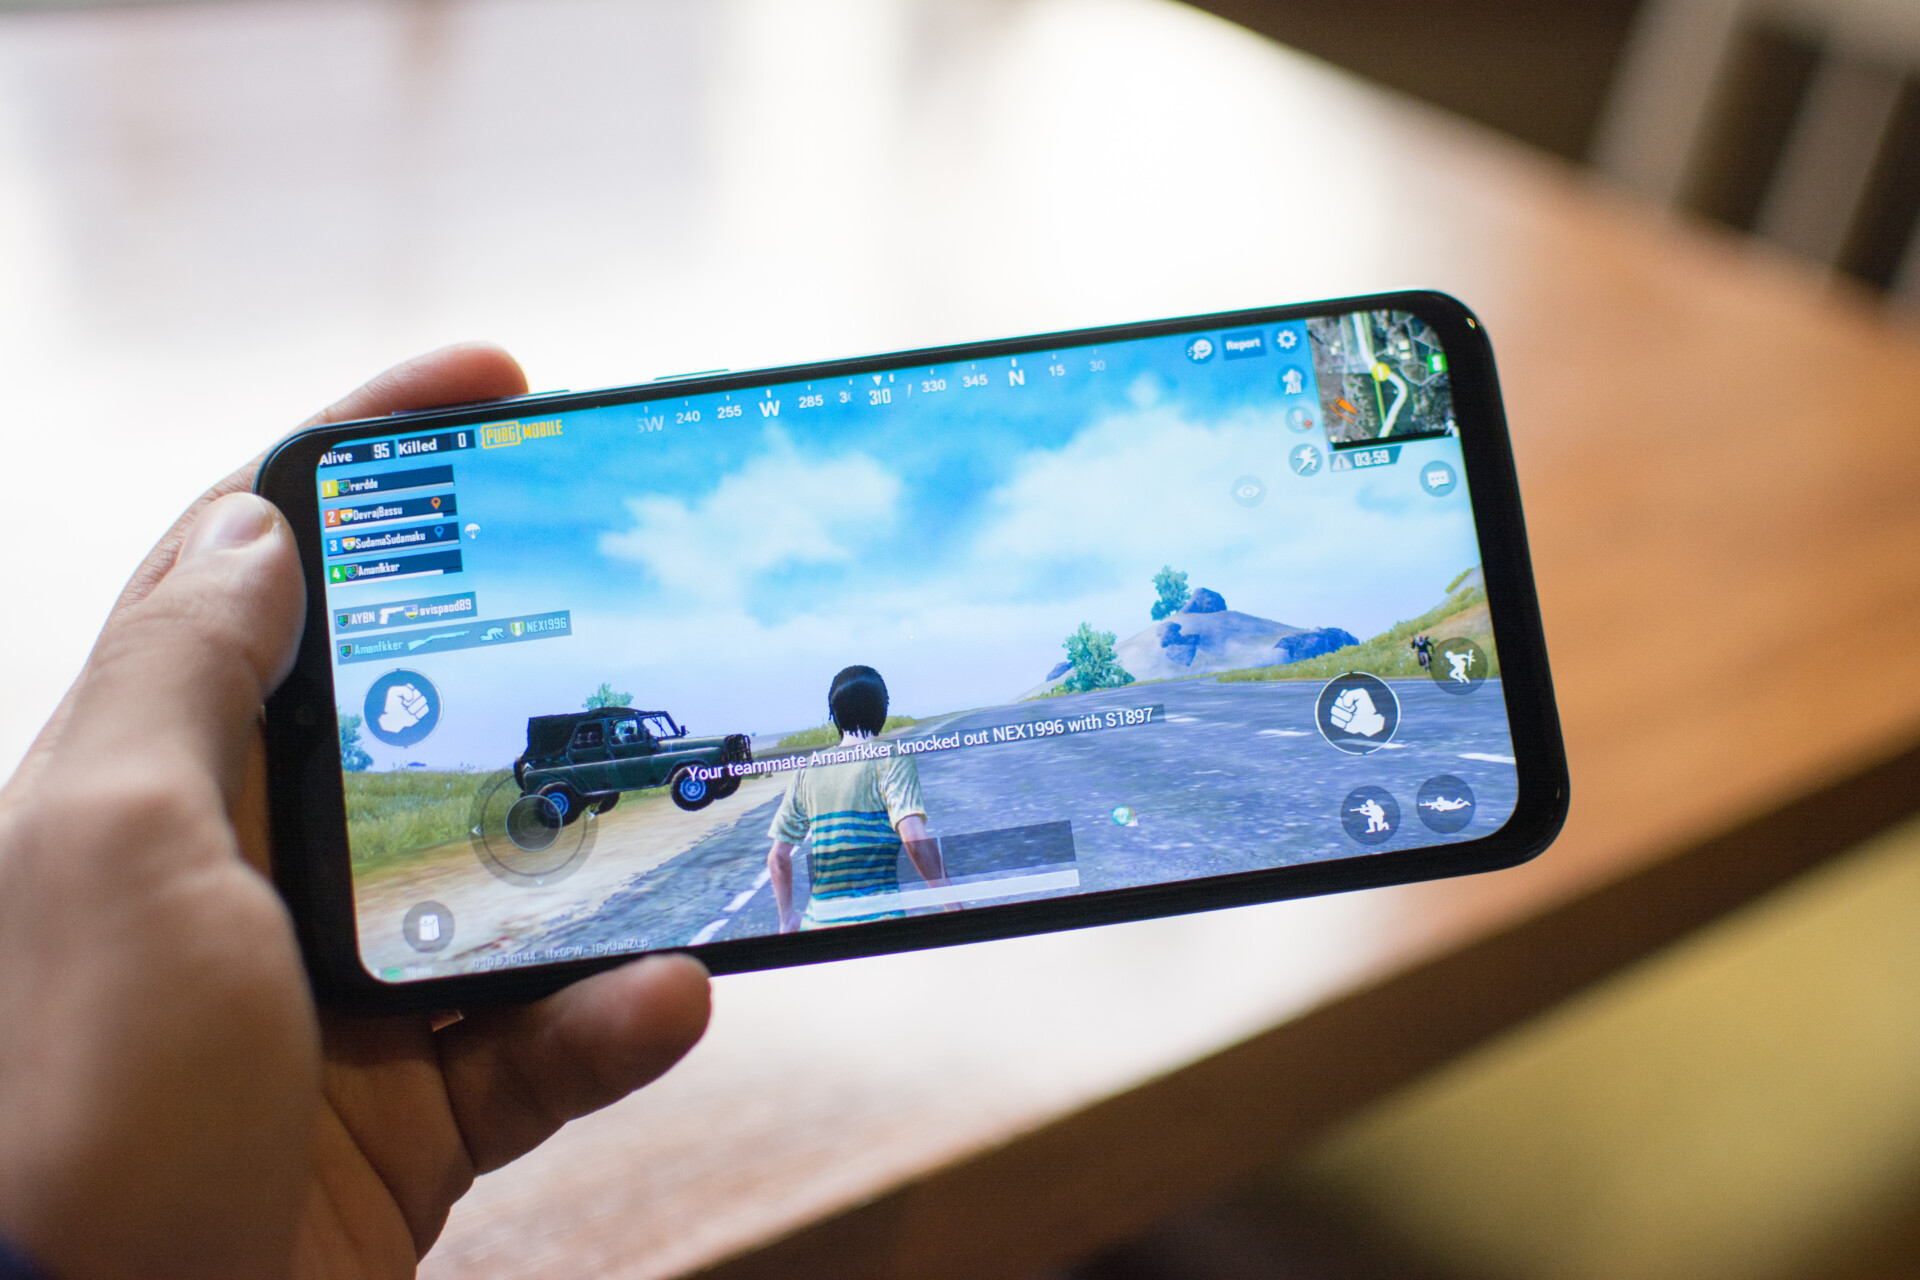 Samsung Galaxy M20 held in hand and playing PubG Mobile.